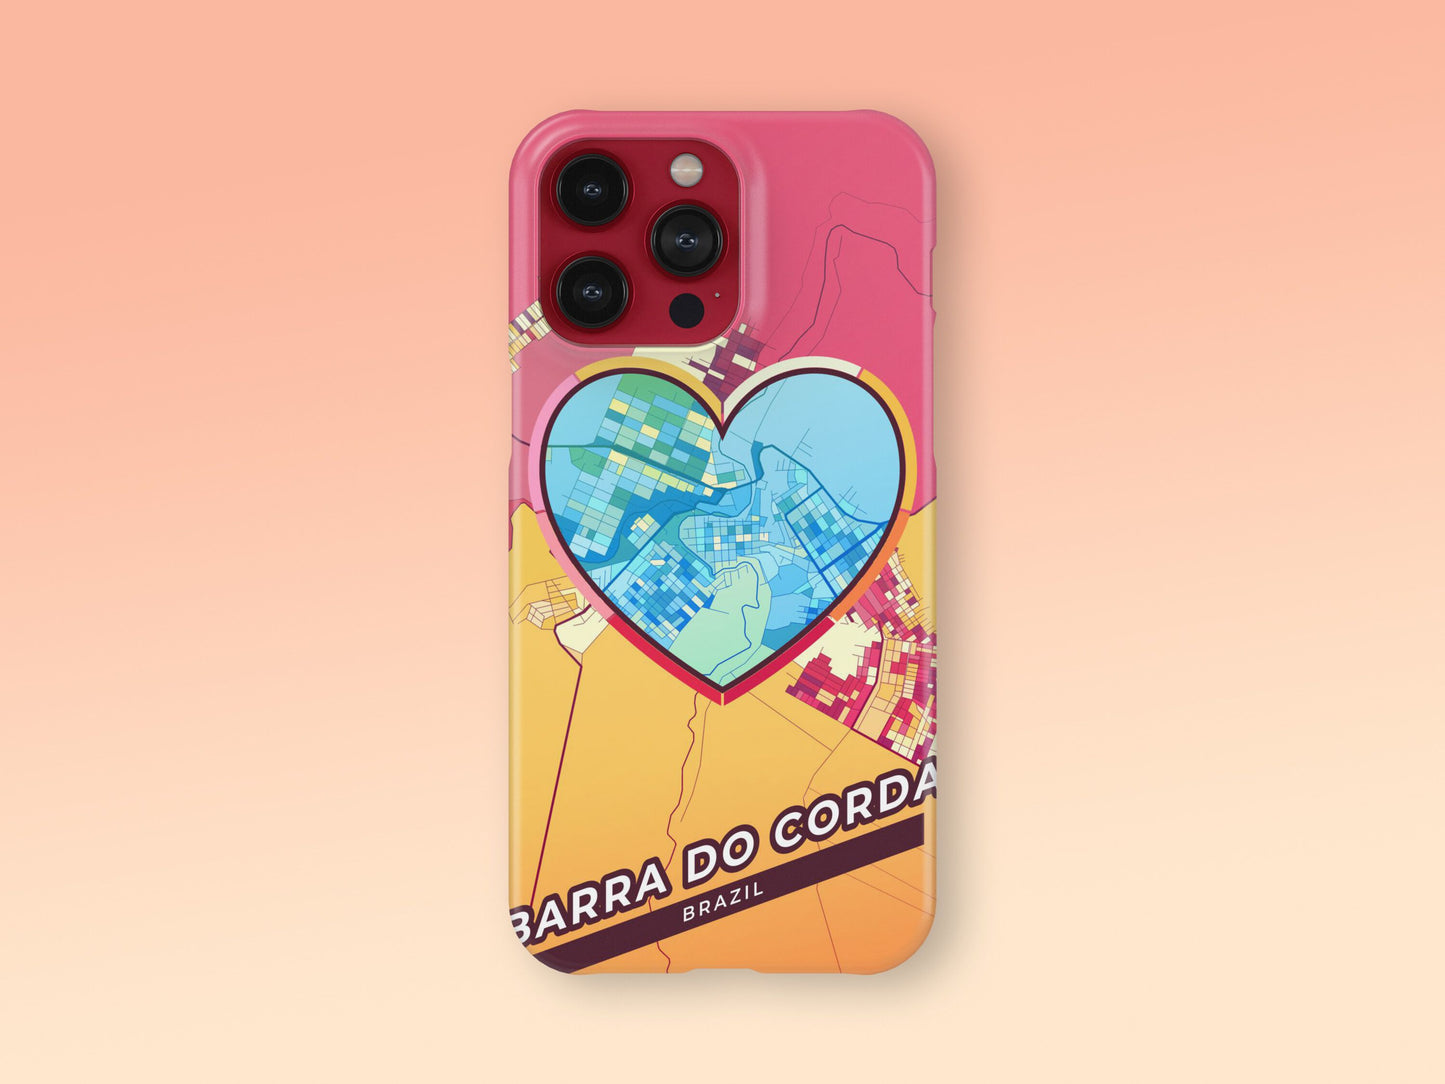 Barra Do Corda Brazil slim phone case with colorful icon. Birthday, wedding or housewarming gift. Couple match cases. 2